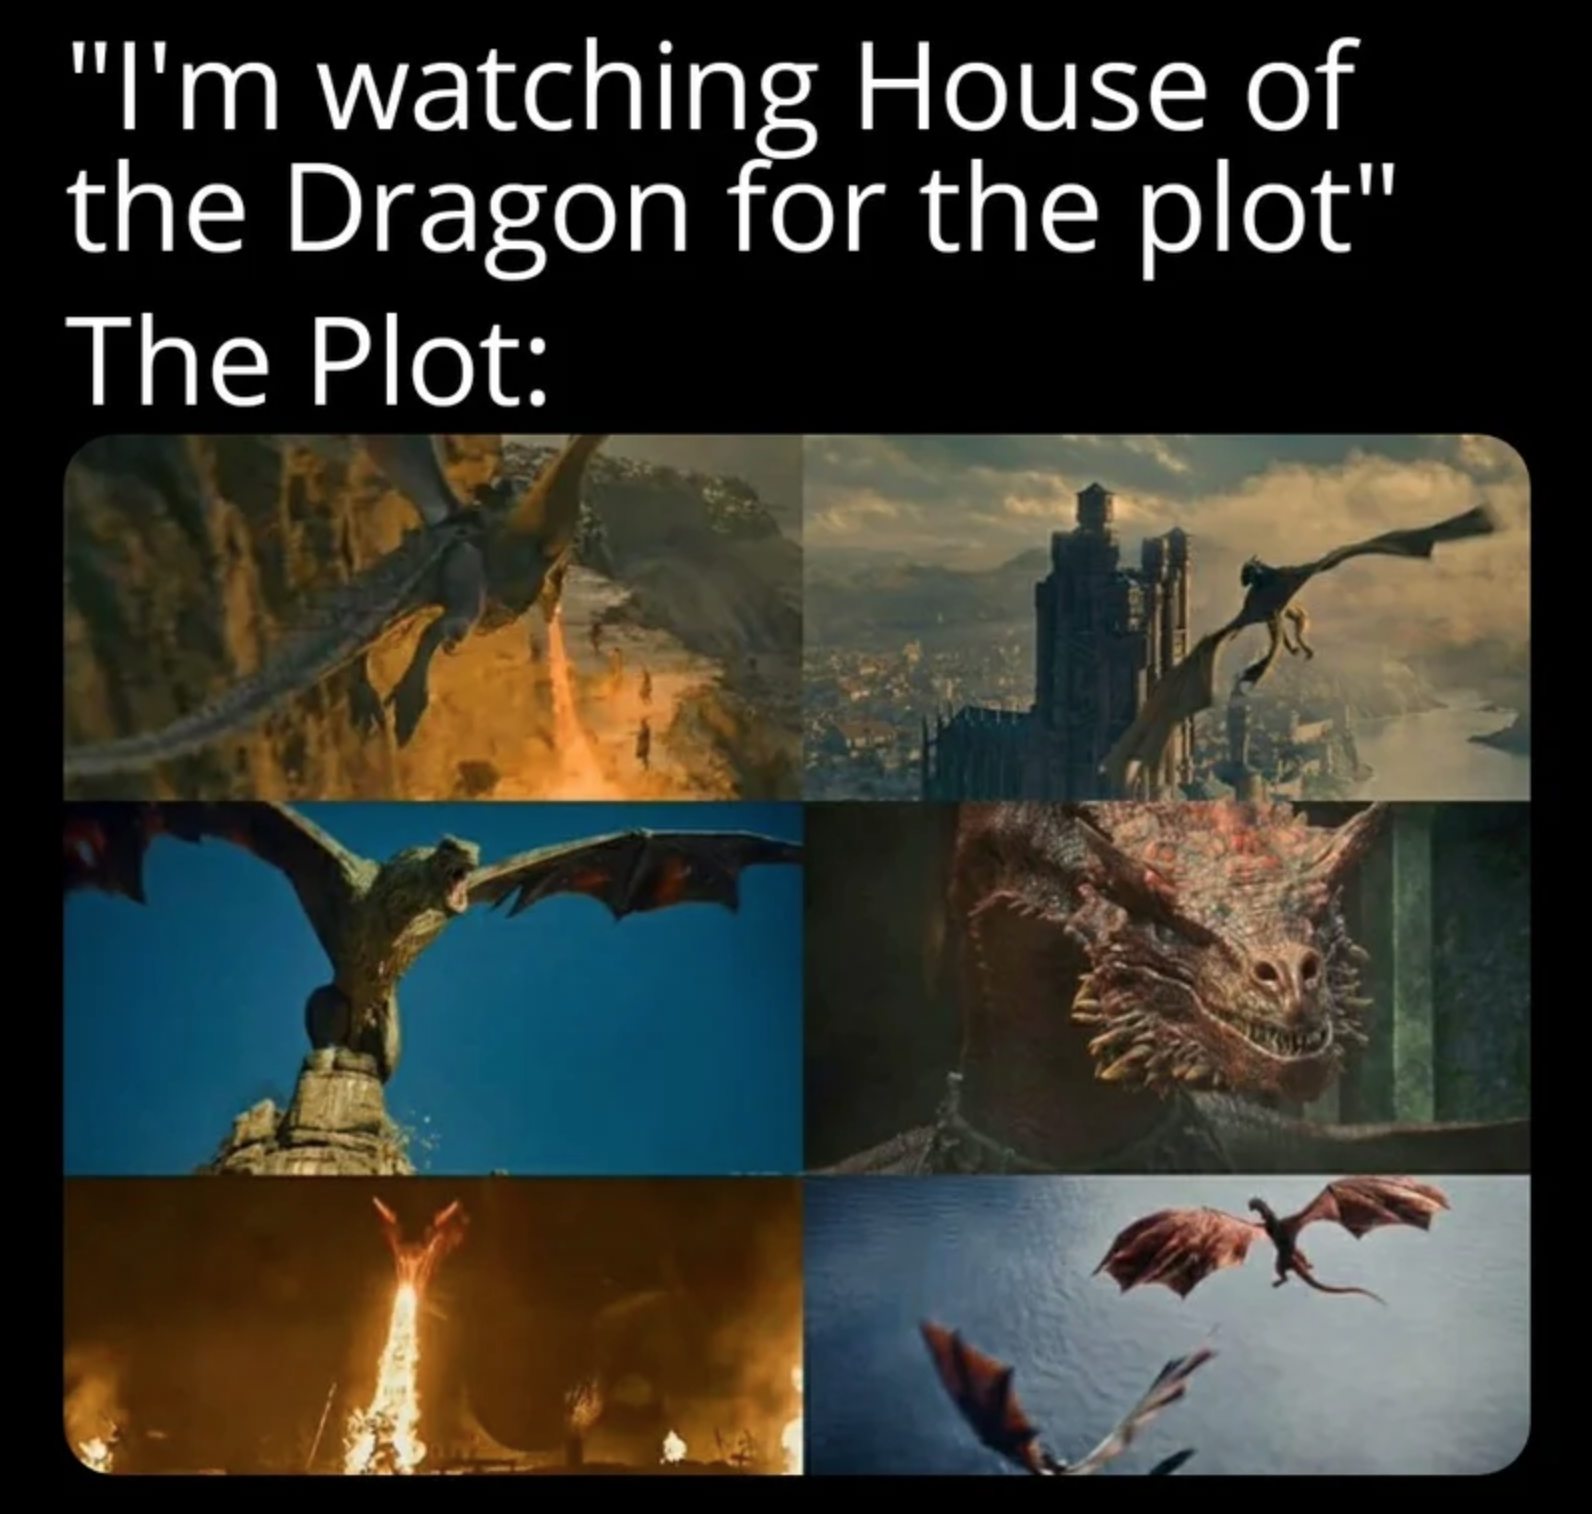 House of the Dragon - "I'm watching House of the Dragon for the plot" The Plot